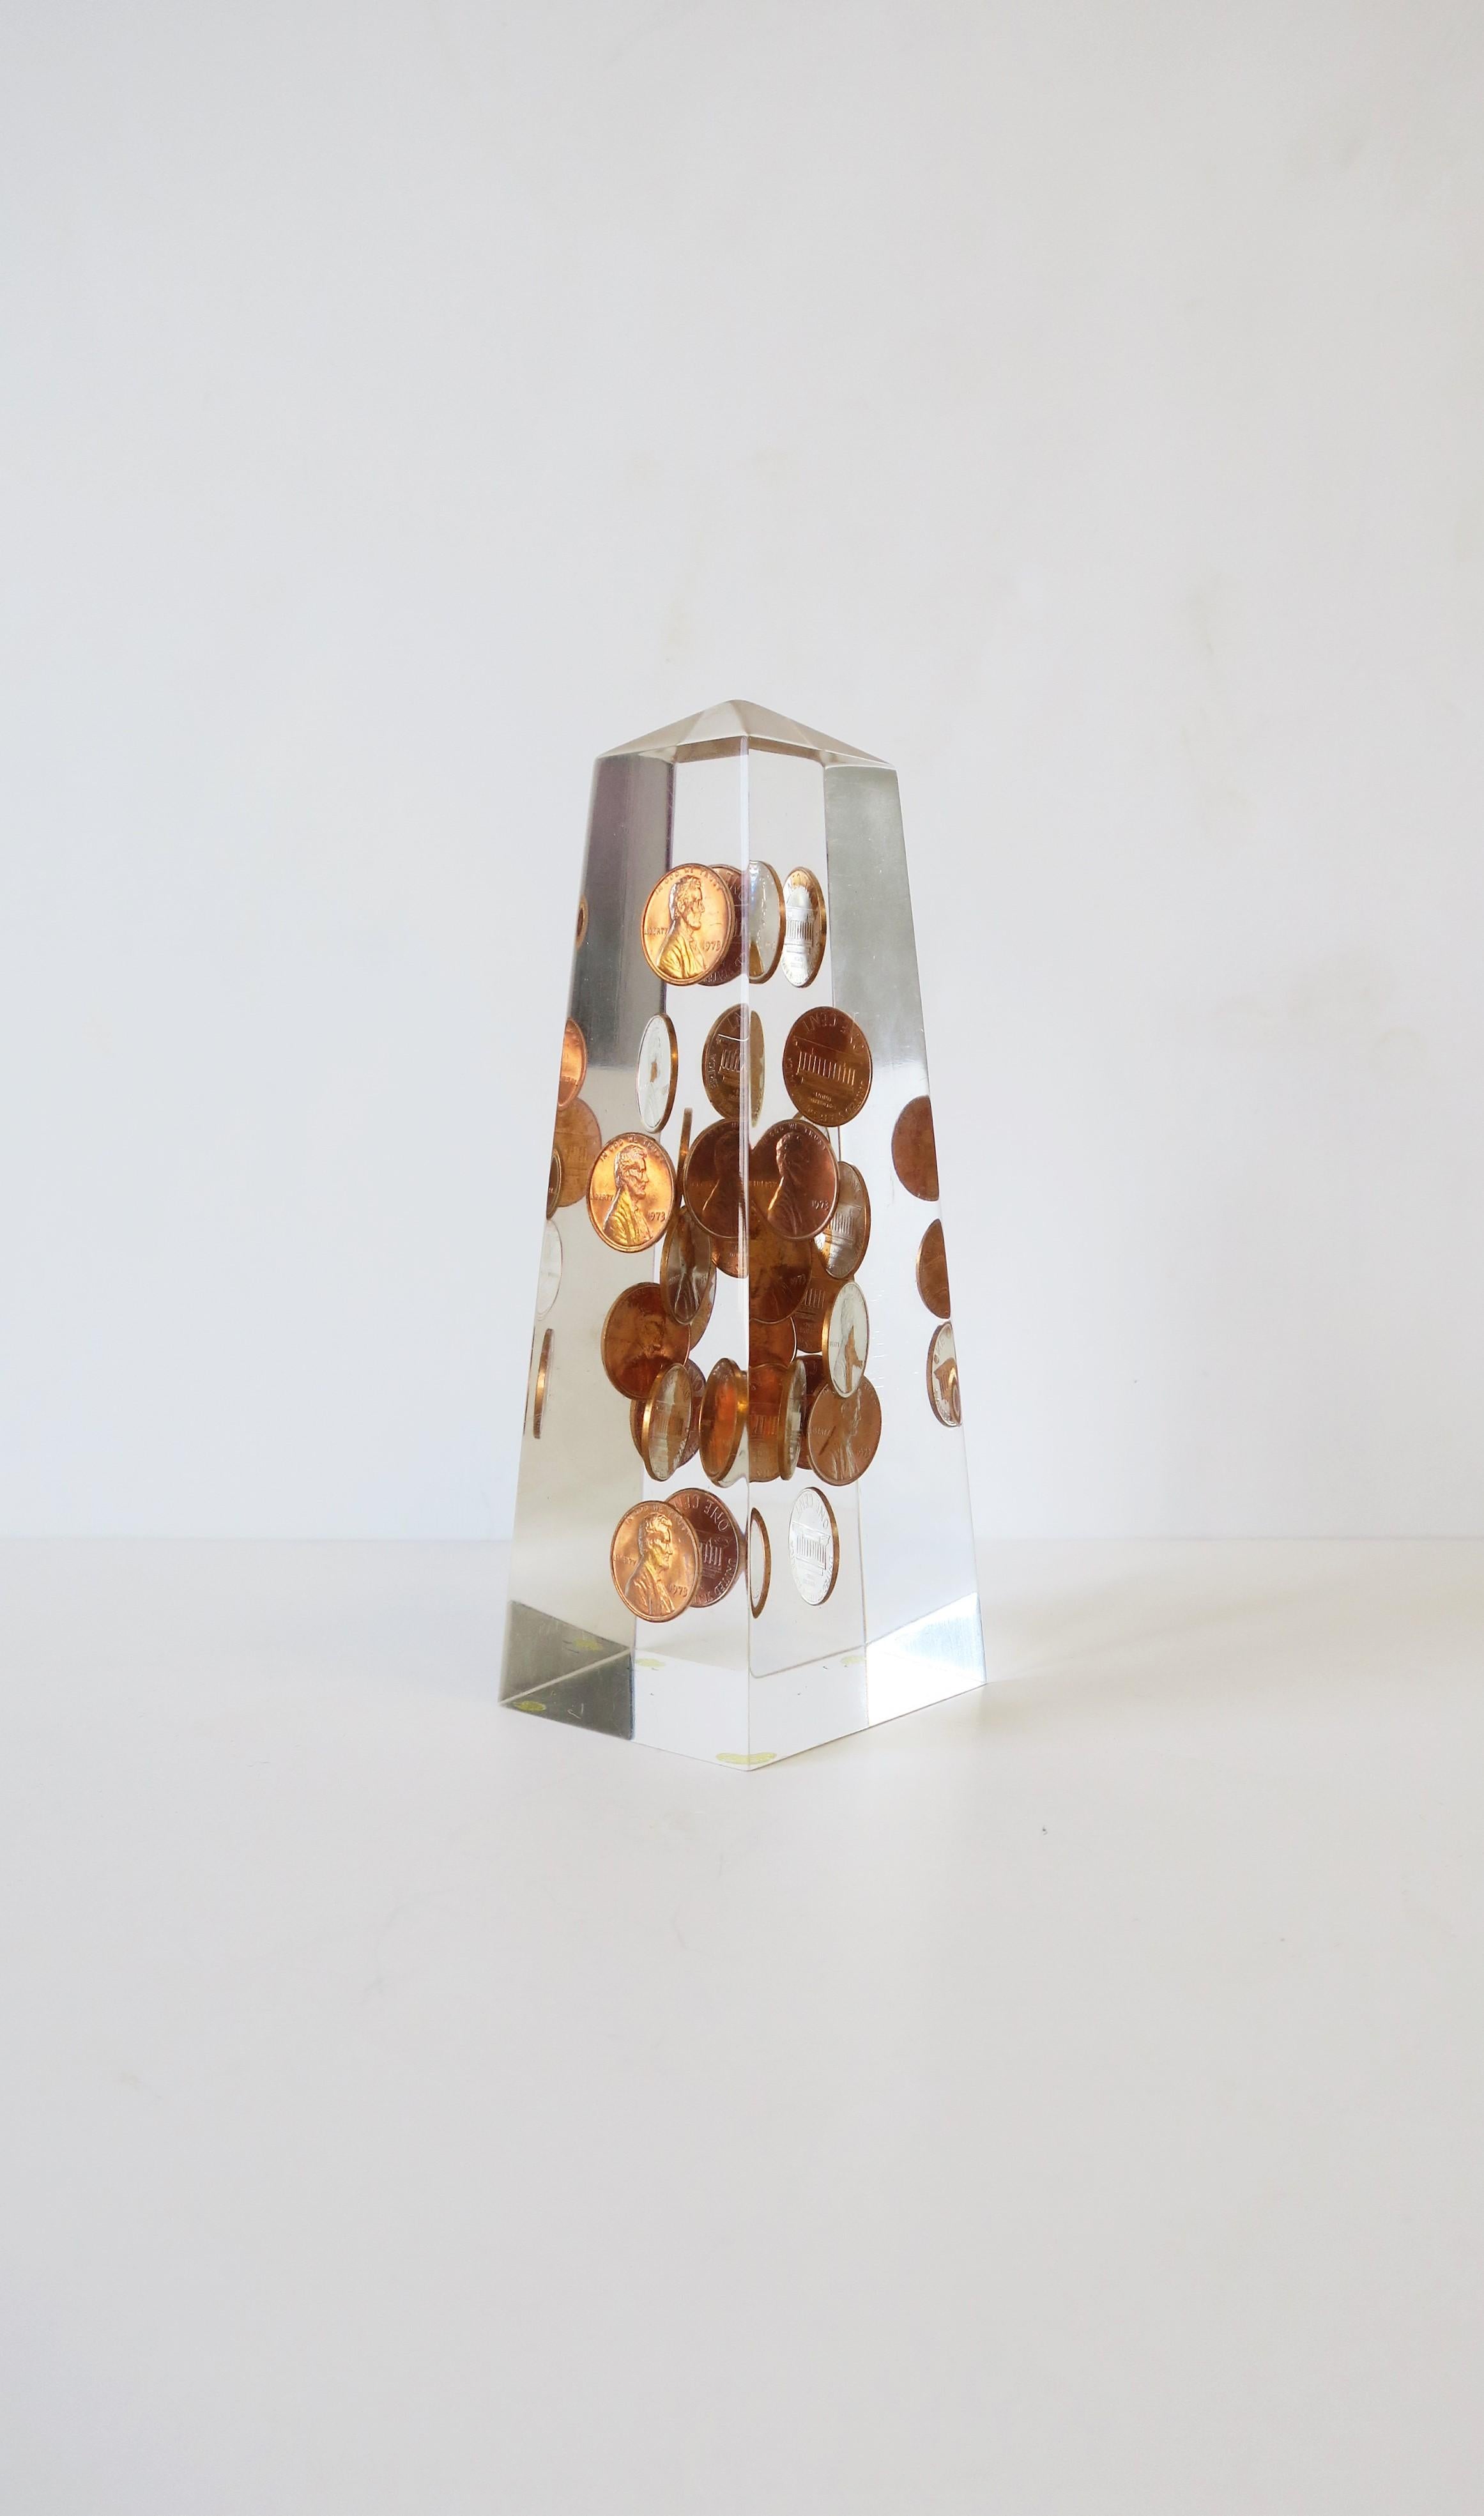 A great 1970s modern or Postmodern period Lucite and U.S. coppery penny decorated obelisk. All copper pennies encased are dated 1973. Obelisk measures: 2.13